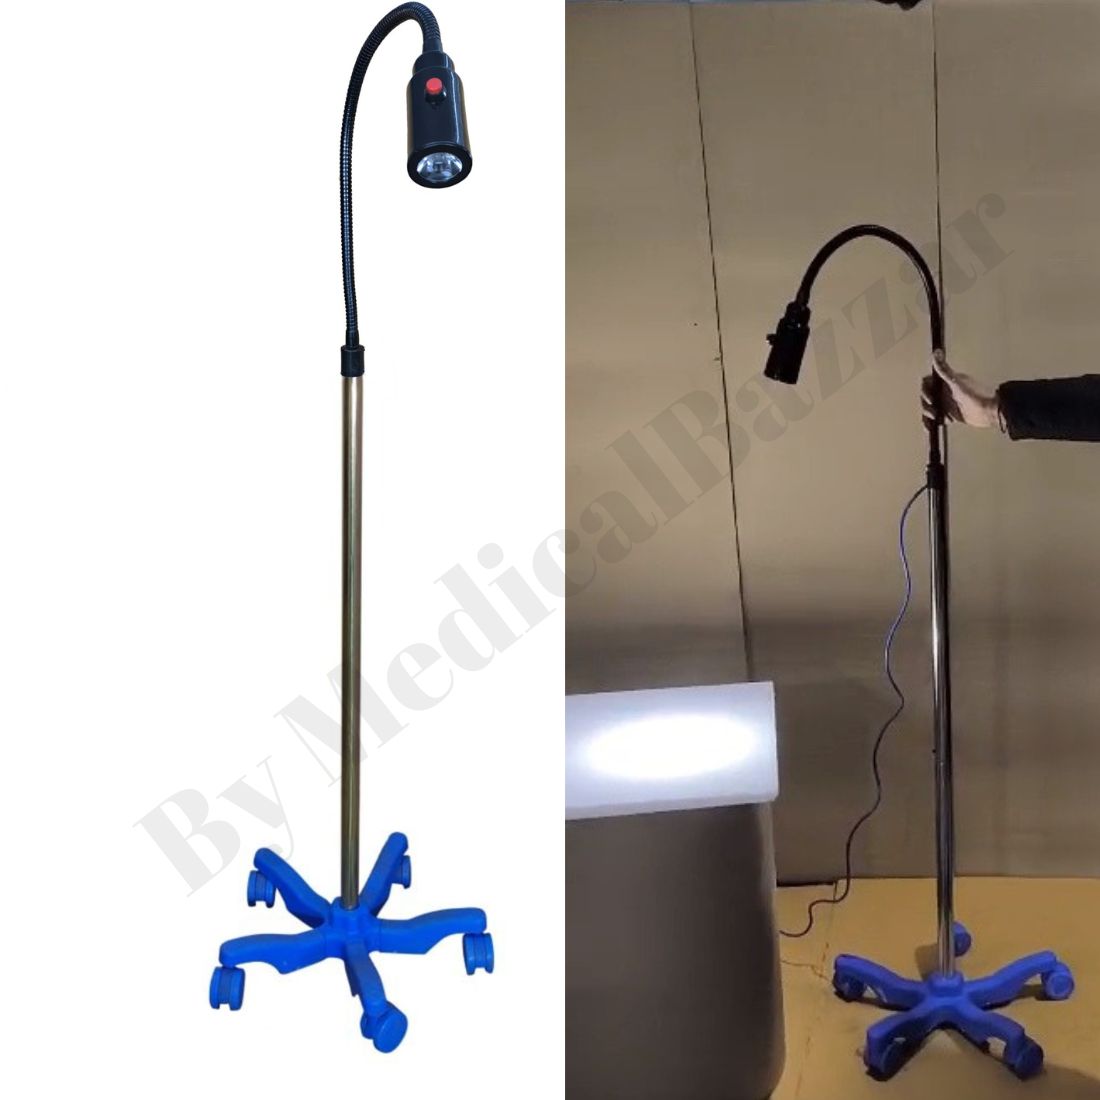 acco Examination OT Light with 1 Led Mobile (German technology)